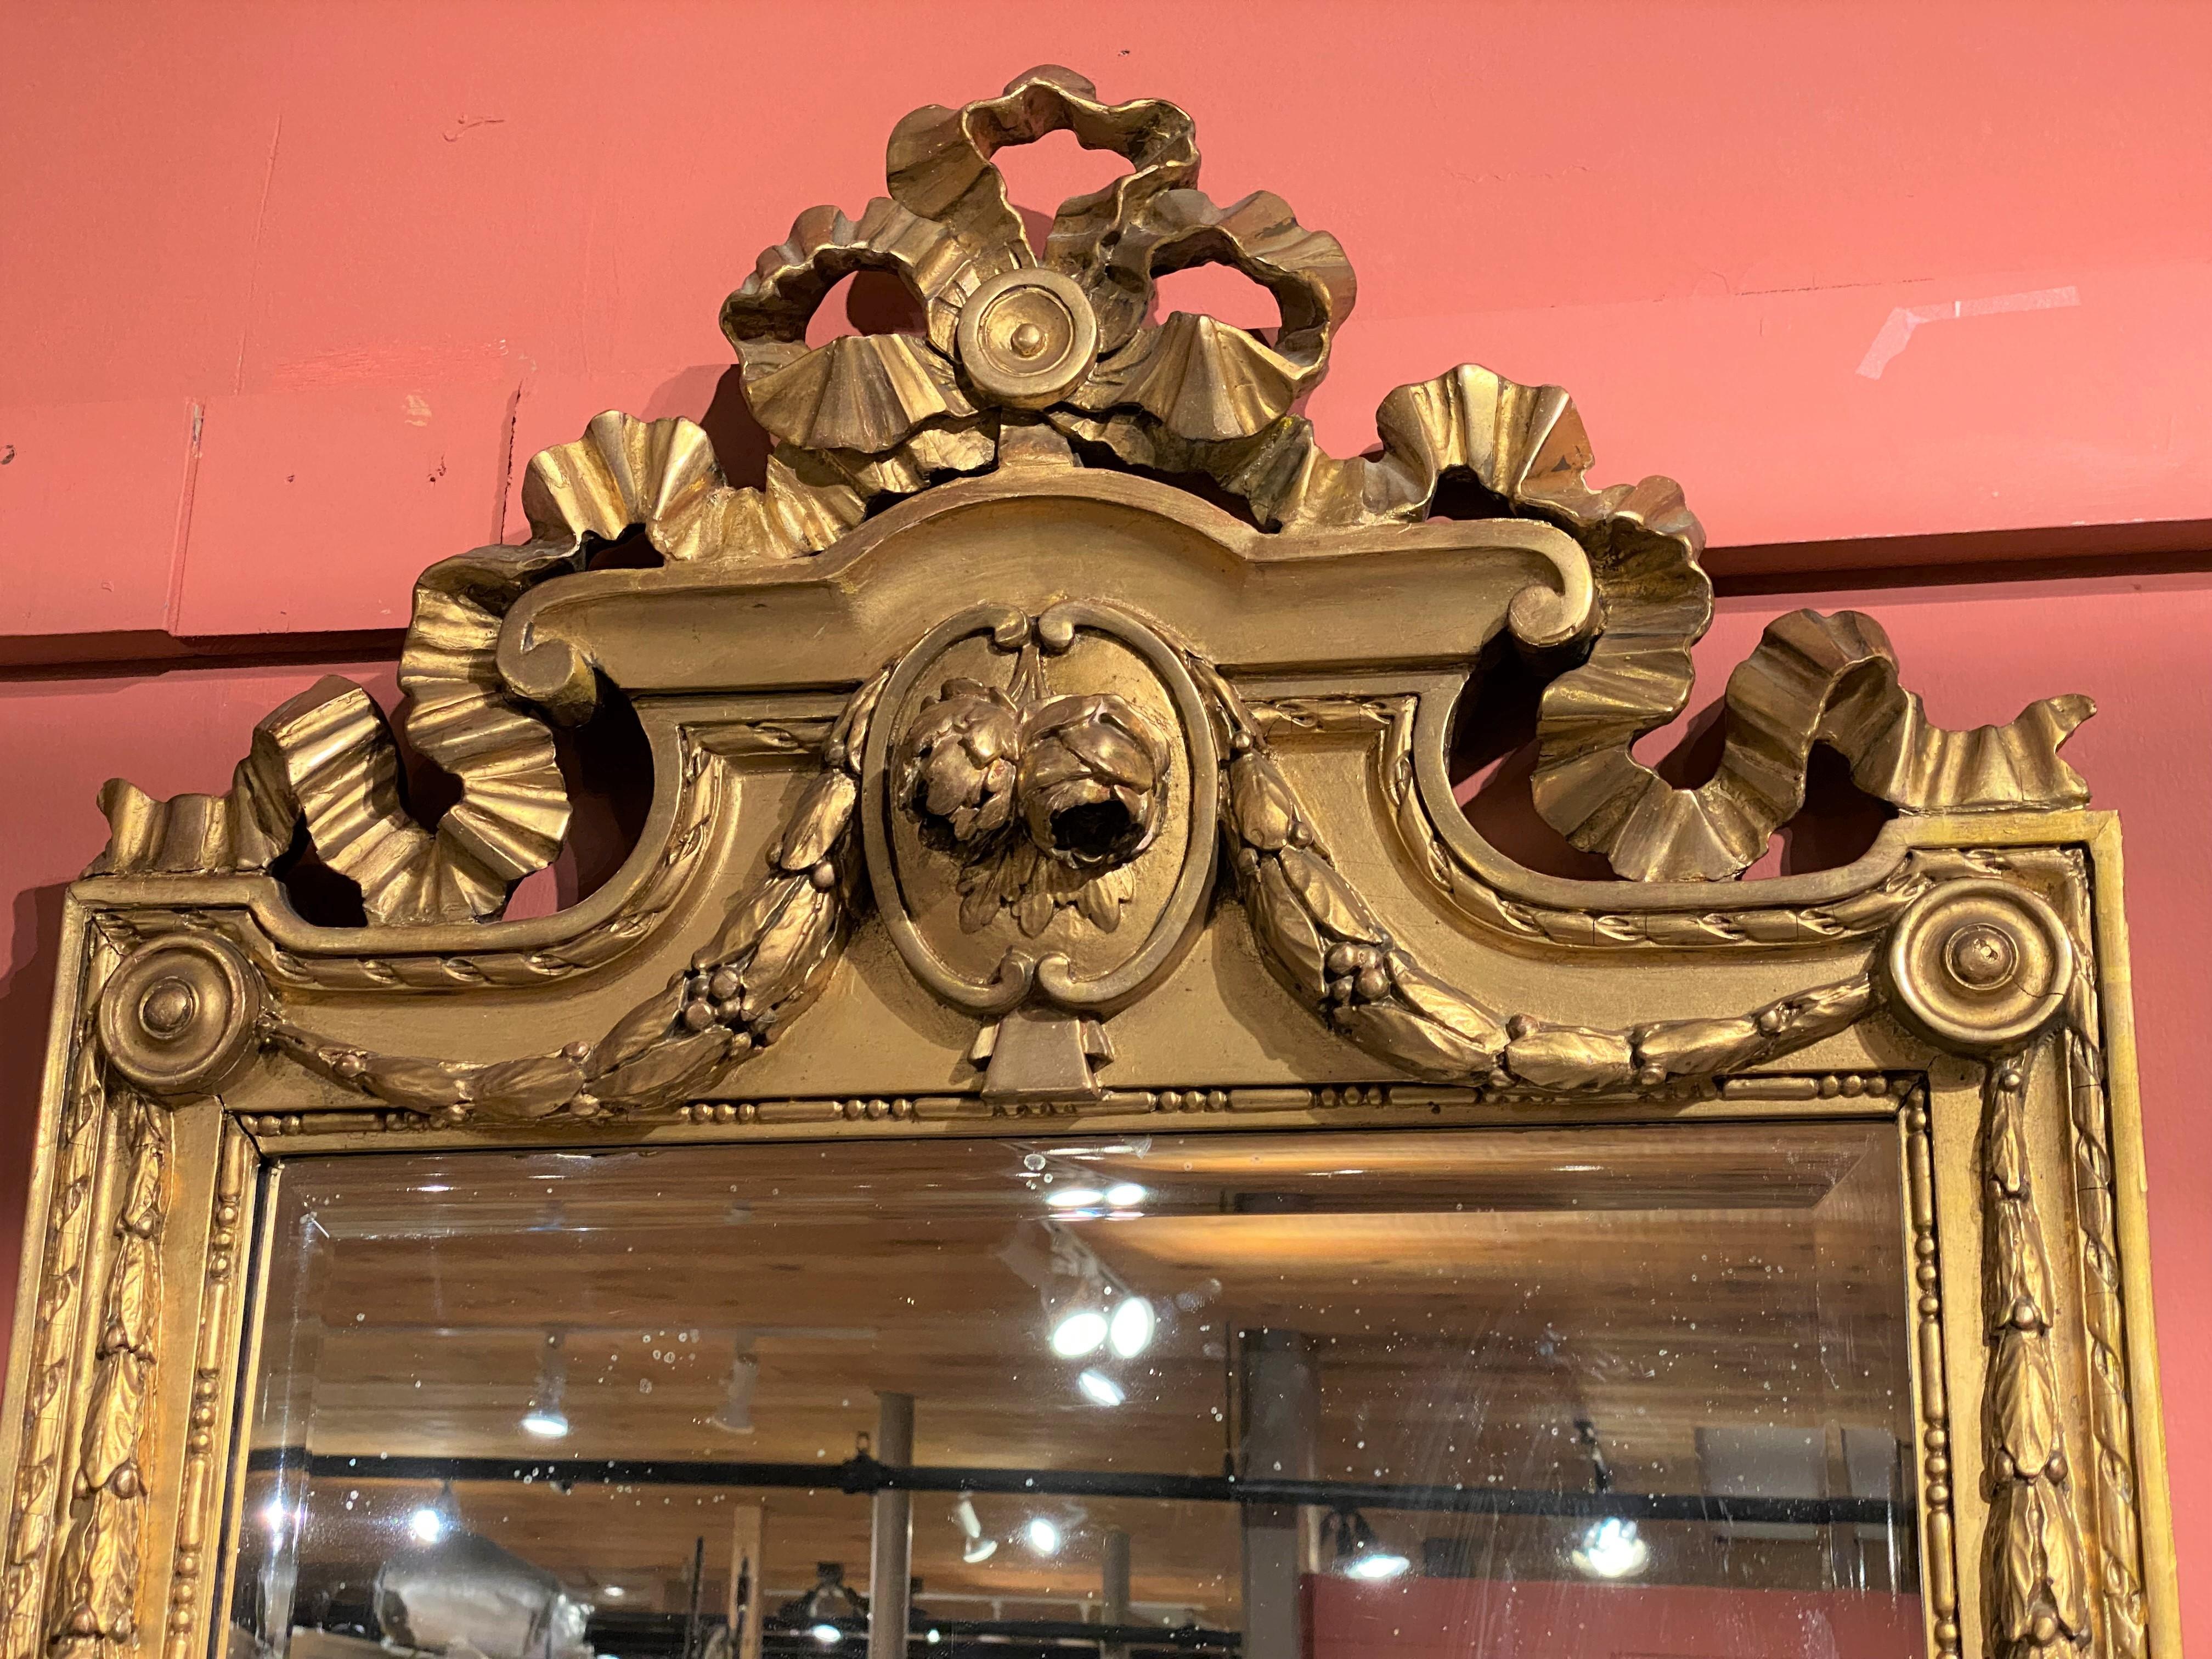 A Swedish Gustavian Period gilt pier mirror with pierce carved ribbon and foliate crest decoration, accented with foliate swags, continued on the beveled mirror surround and base. Dates to the late 18th or early 19th century, in very good condition,